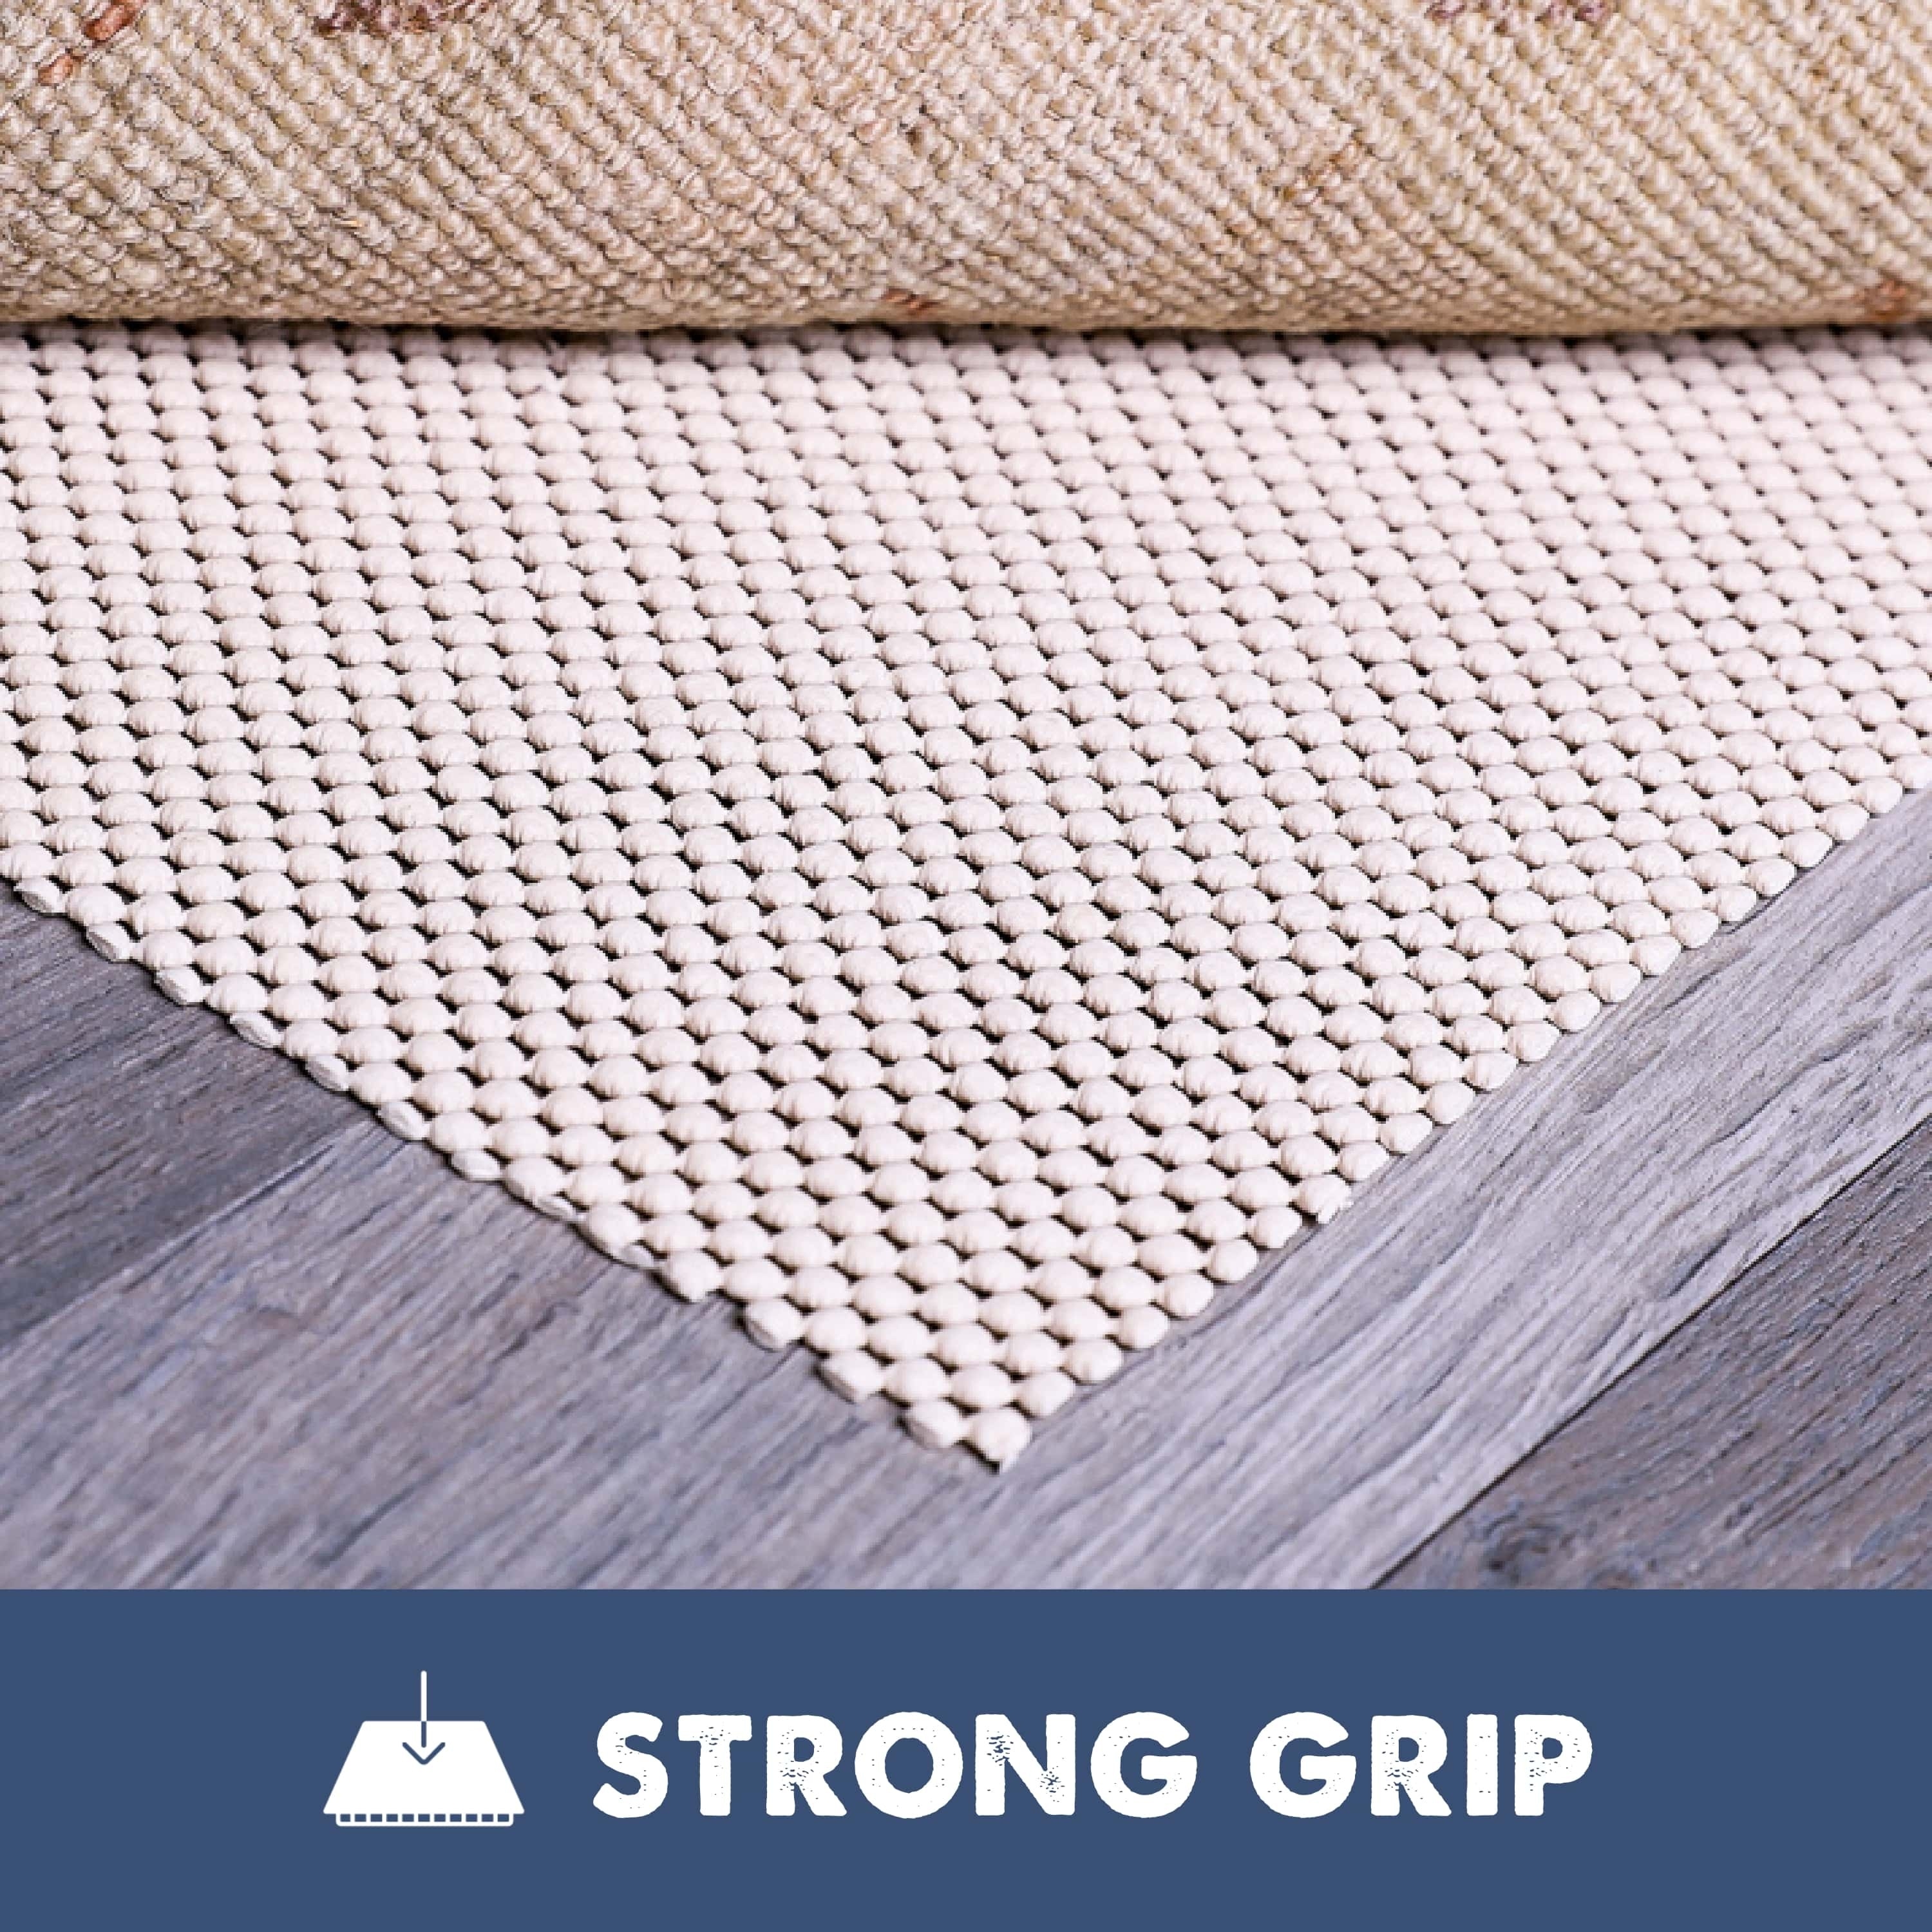 https://ak1.ostkcdn.com/images/products/is/images/direct/01aa108382fc4e1cd82b2d94465d0bf4672ce163/Super-Grip-Natural-Non-Slip-Rug-Pad-by-Slip-Stop.jpg